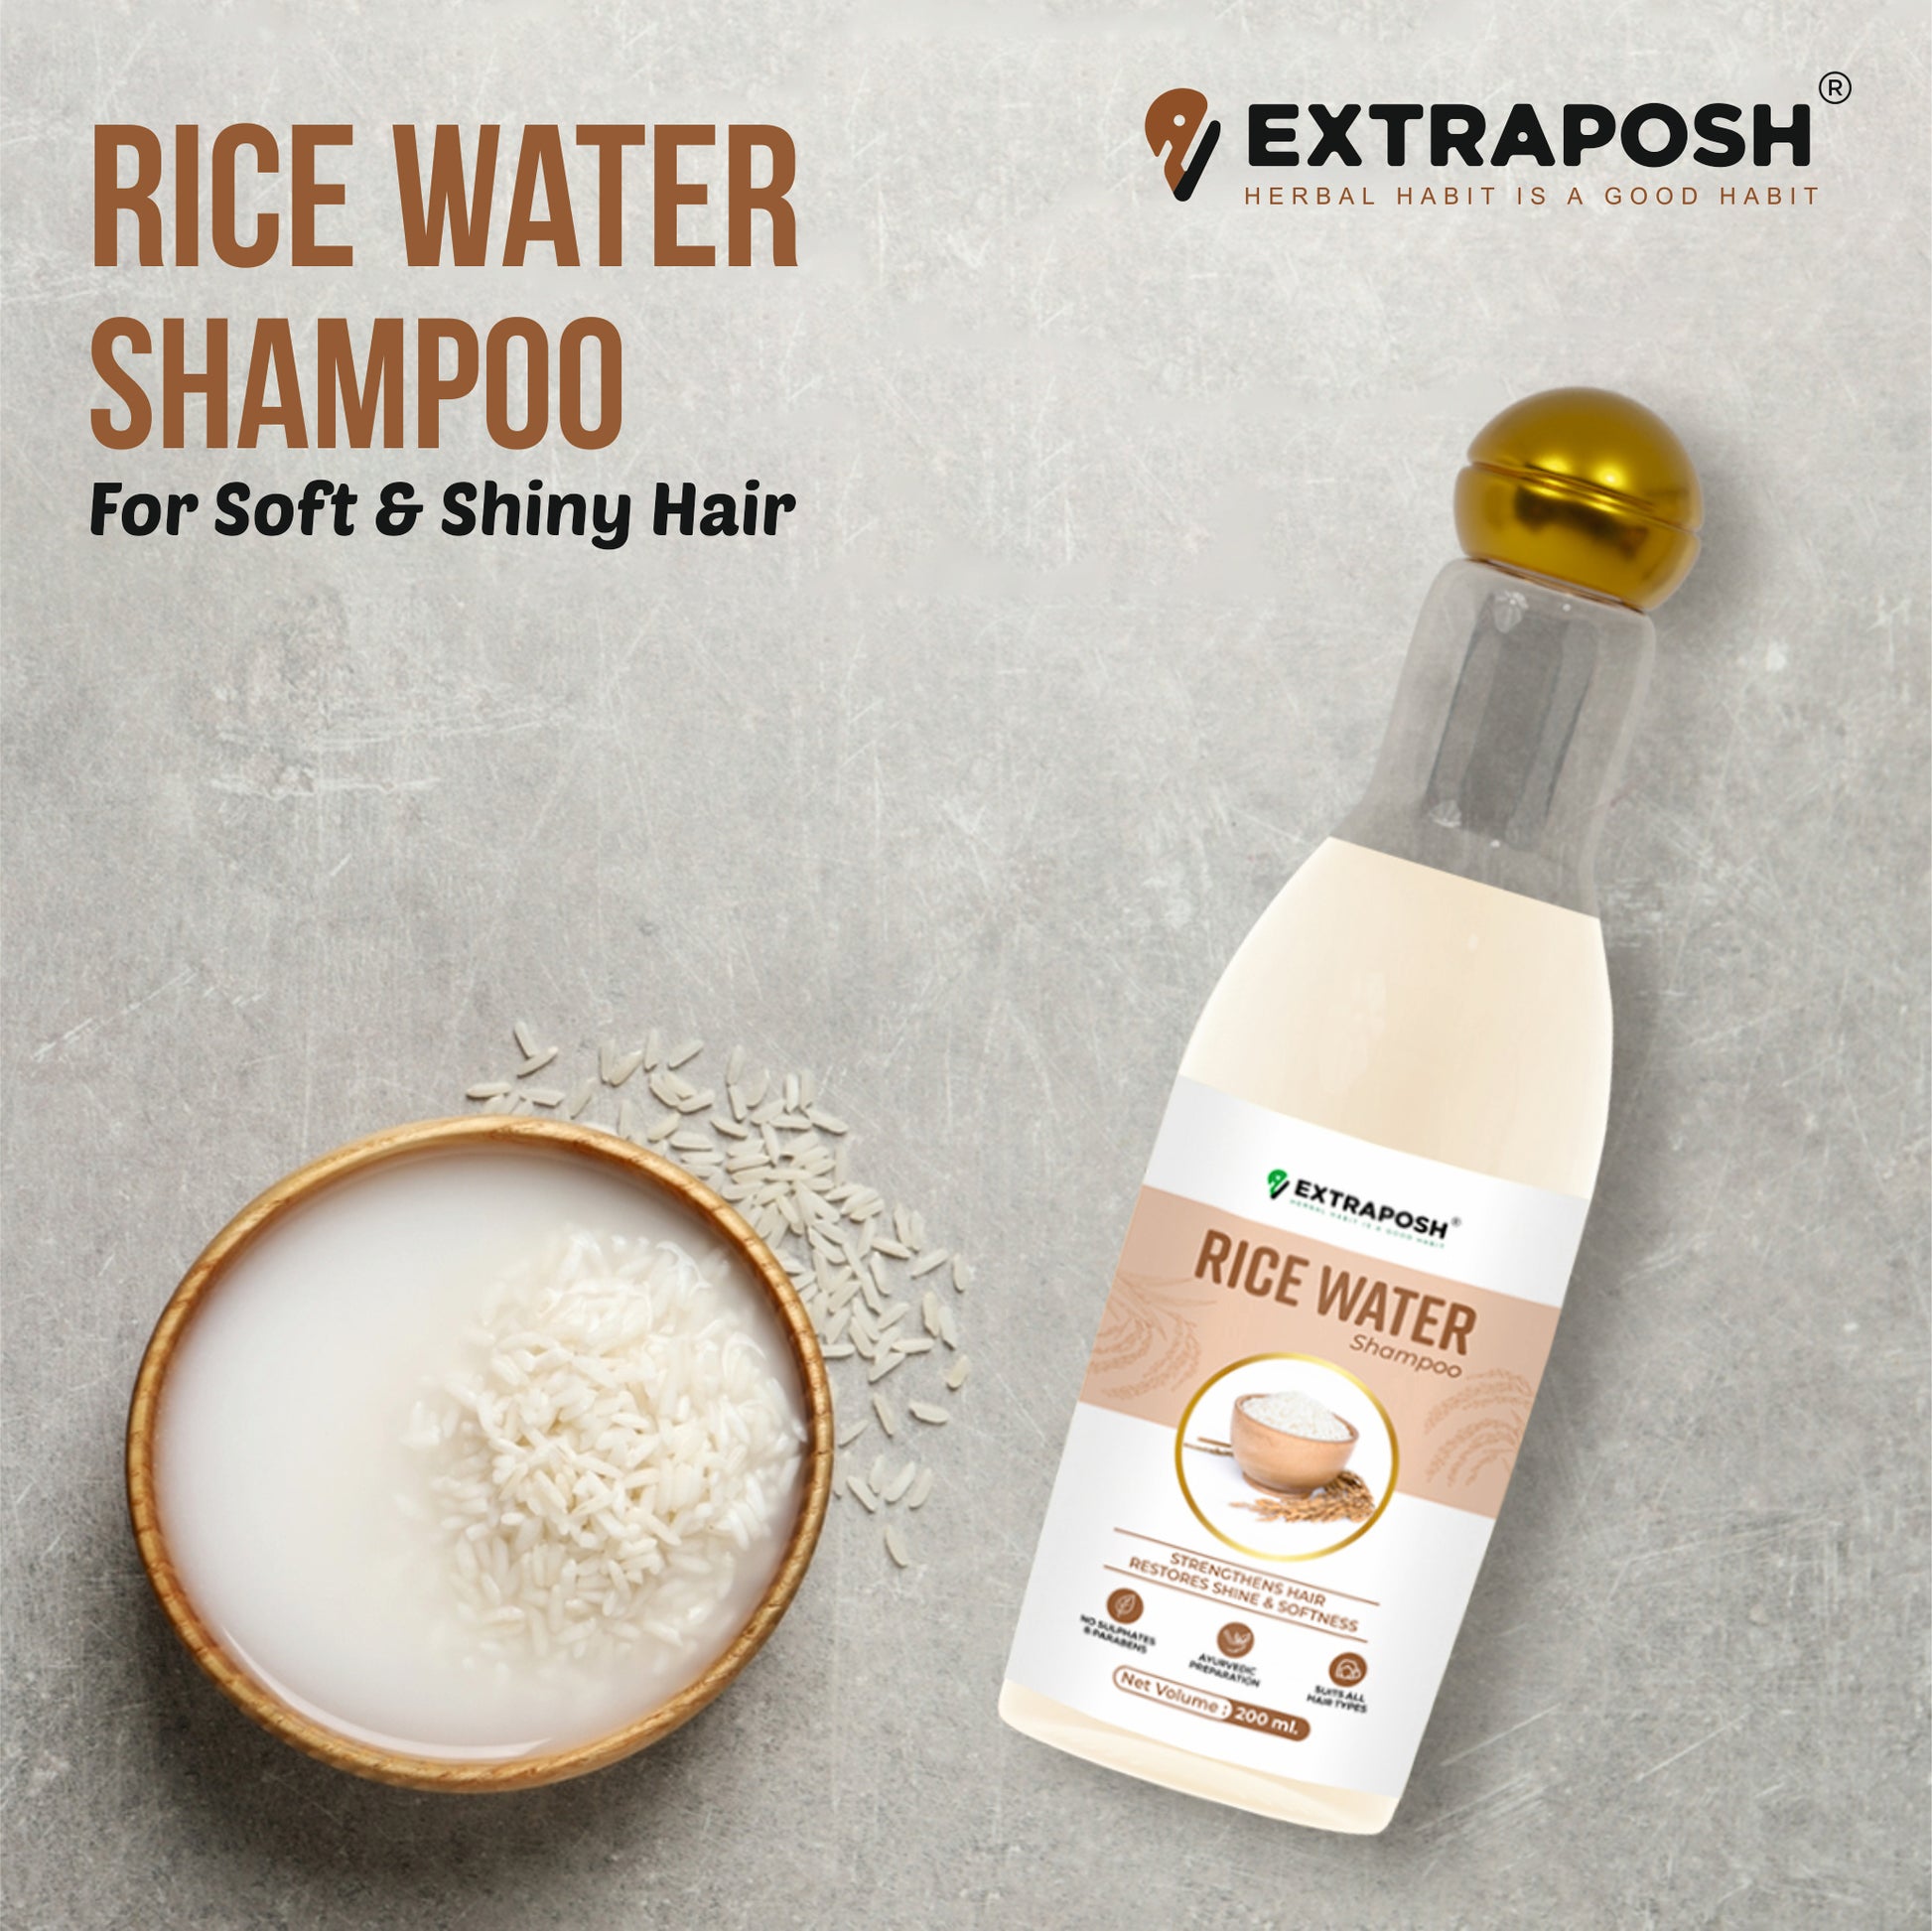 RICE WATER SHAMPOO FOR MAKES HAIR STRONGER & CONTROLS HAIRFALL 